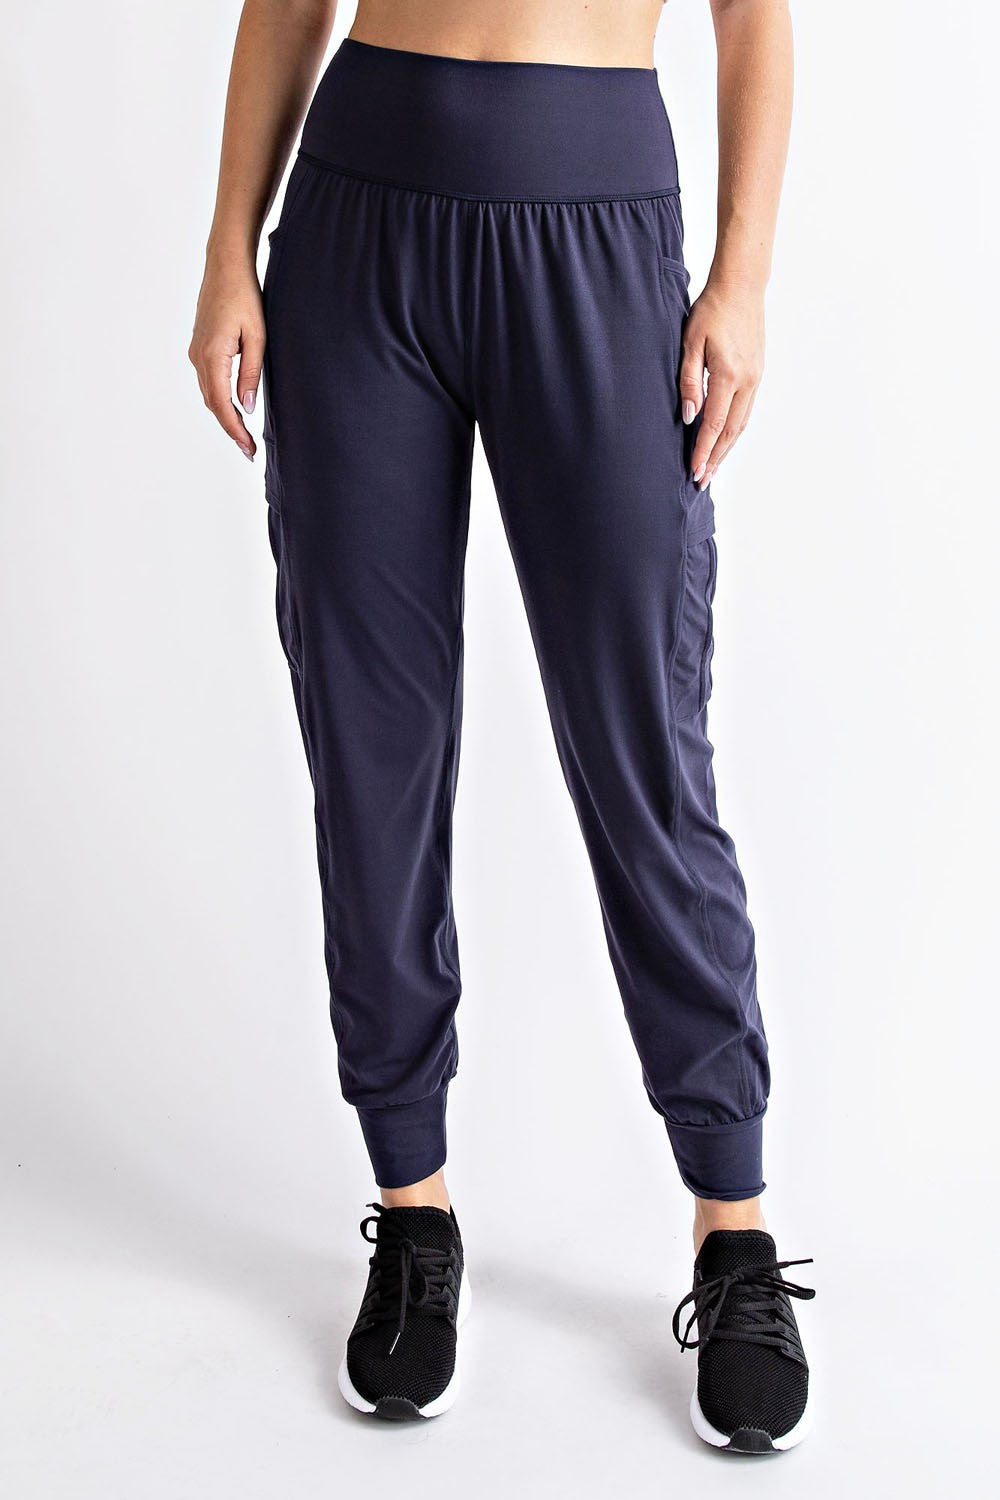 BUTTER FABRIC SOLID JOGGER — Jernigan's